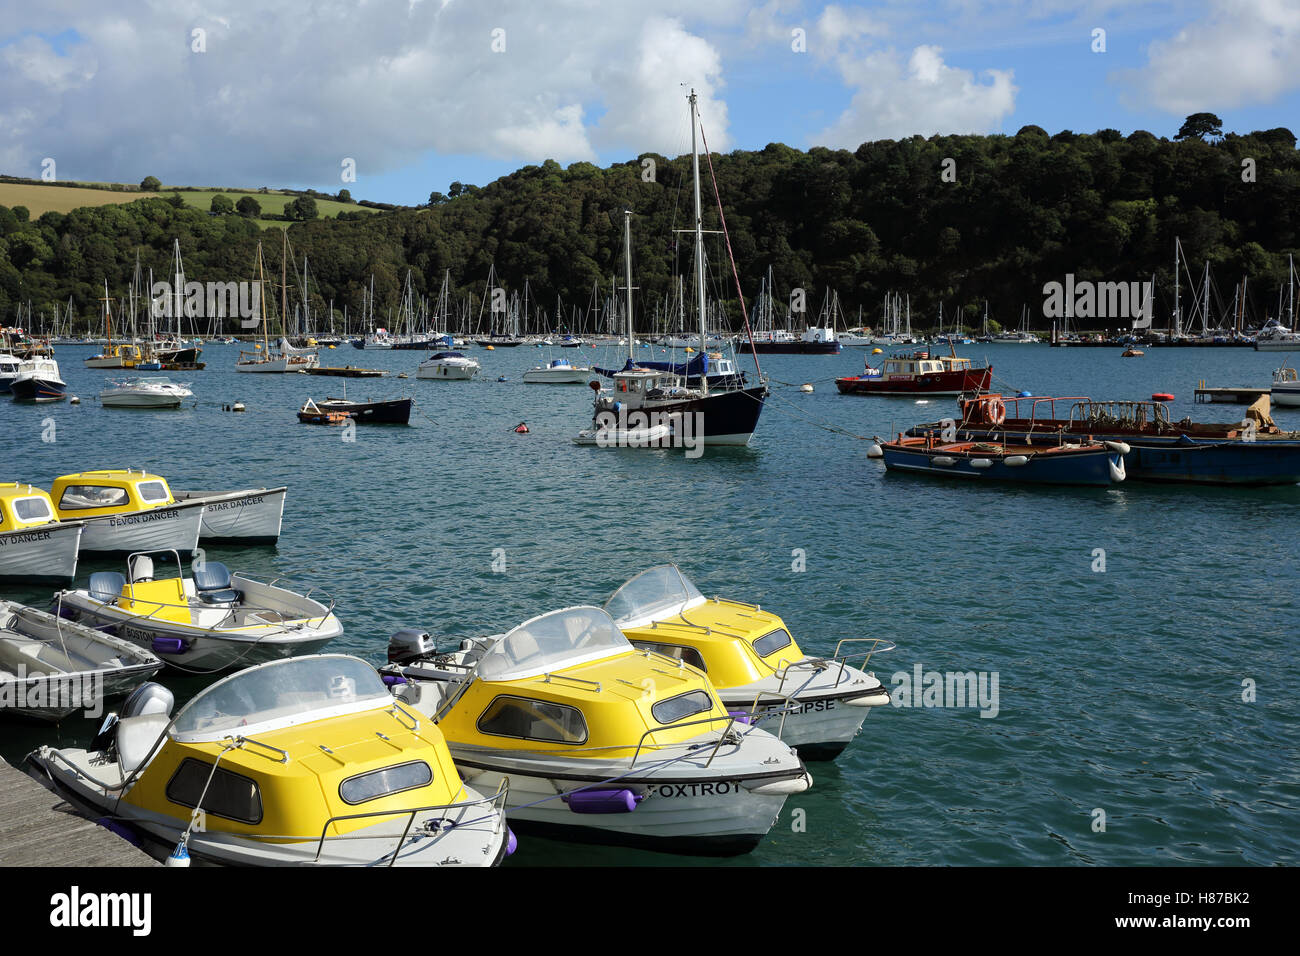 Motor boats for hire in Dartmouth, Devon, England, UK, with other boats and the river Dart in the background. Stock Photo